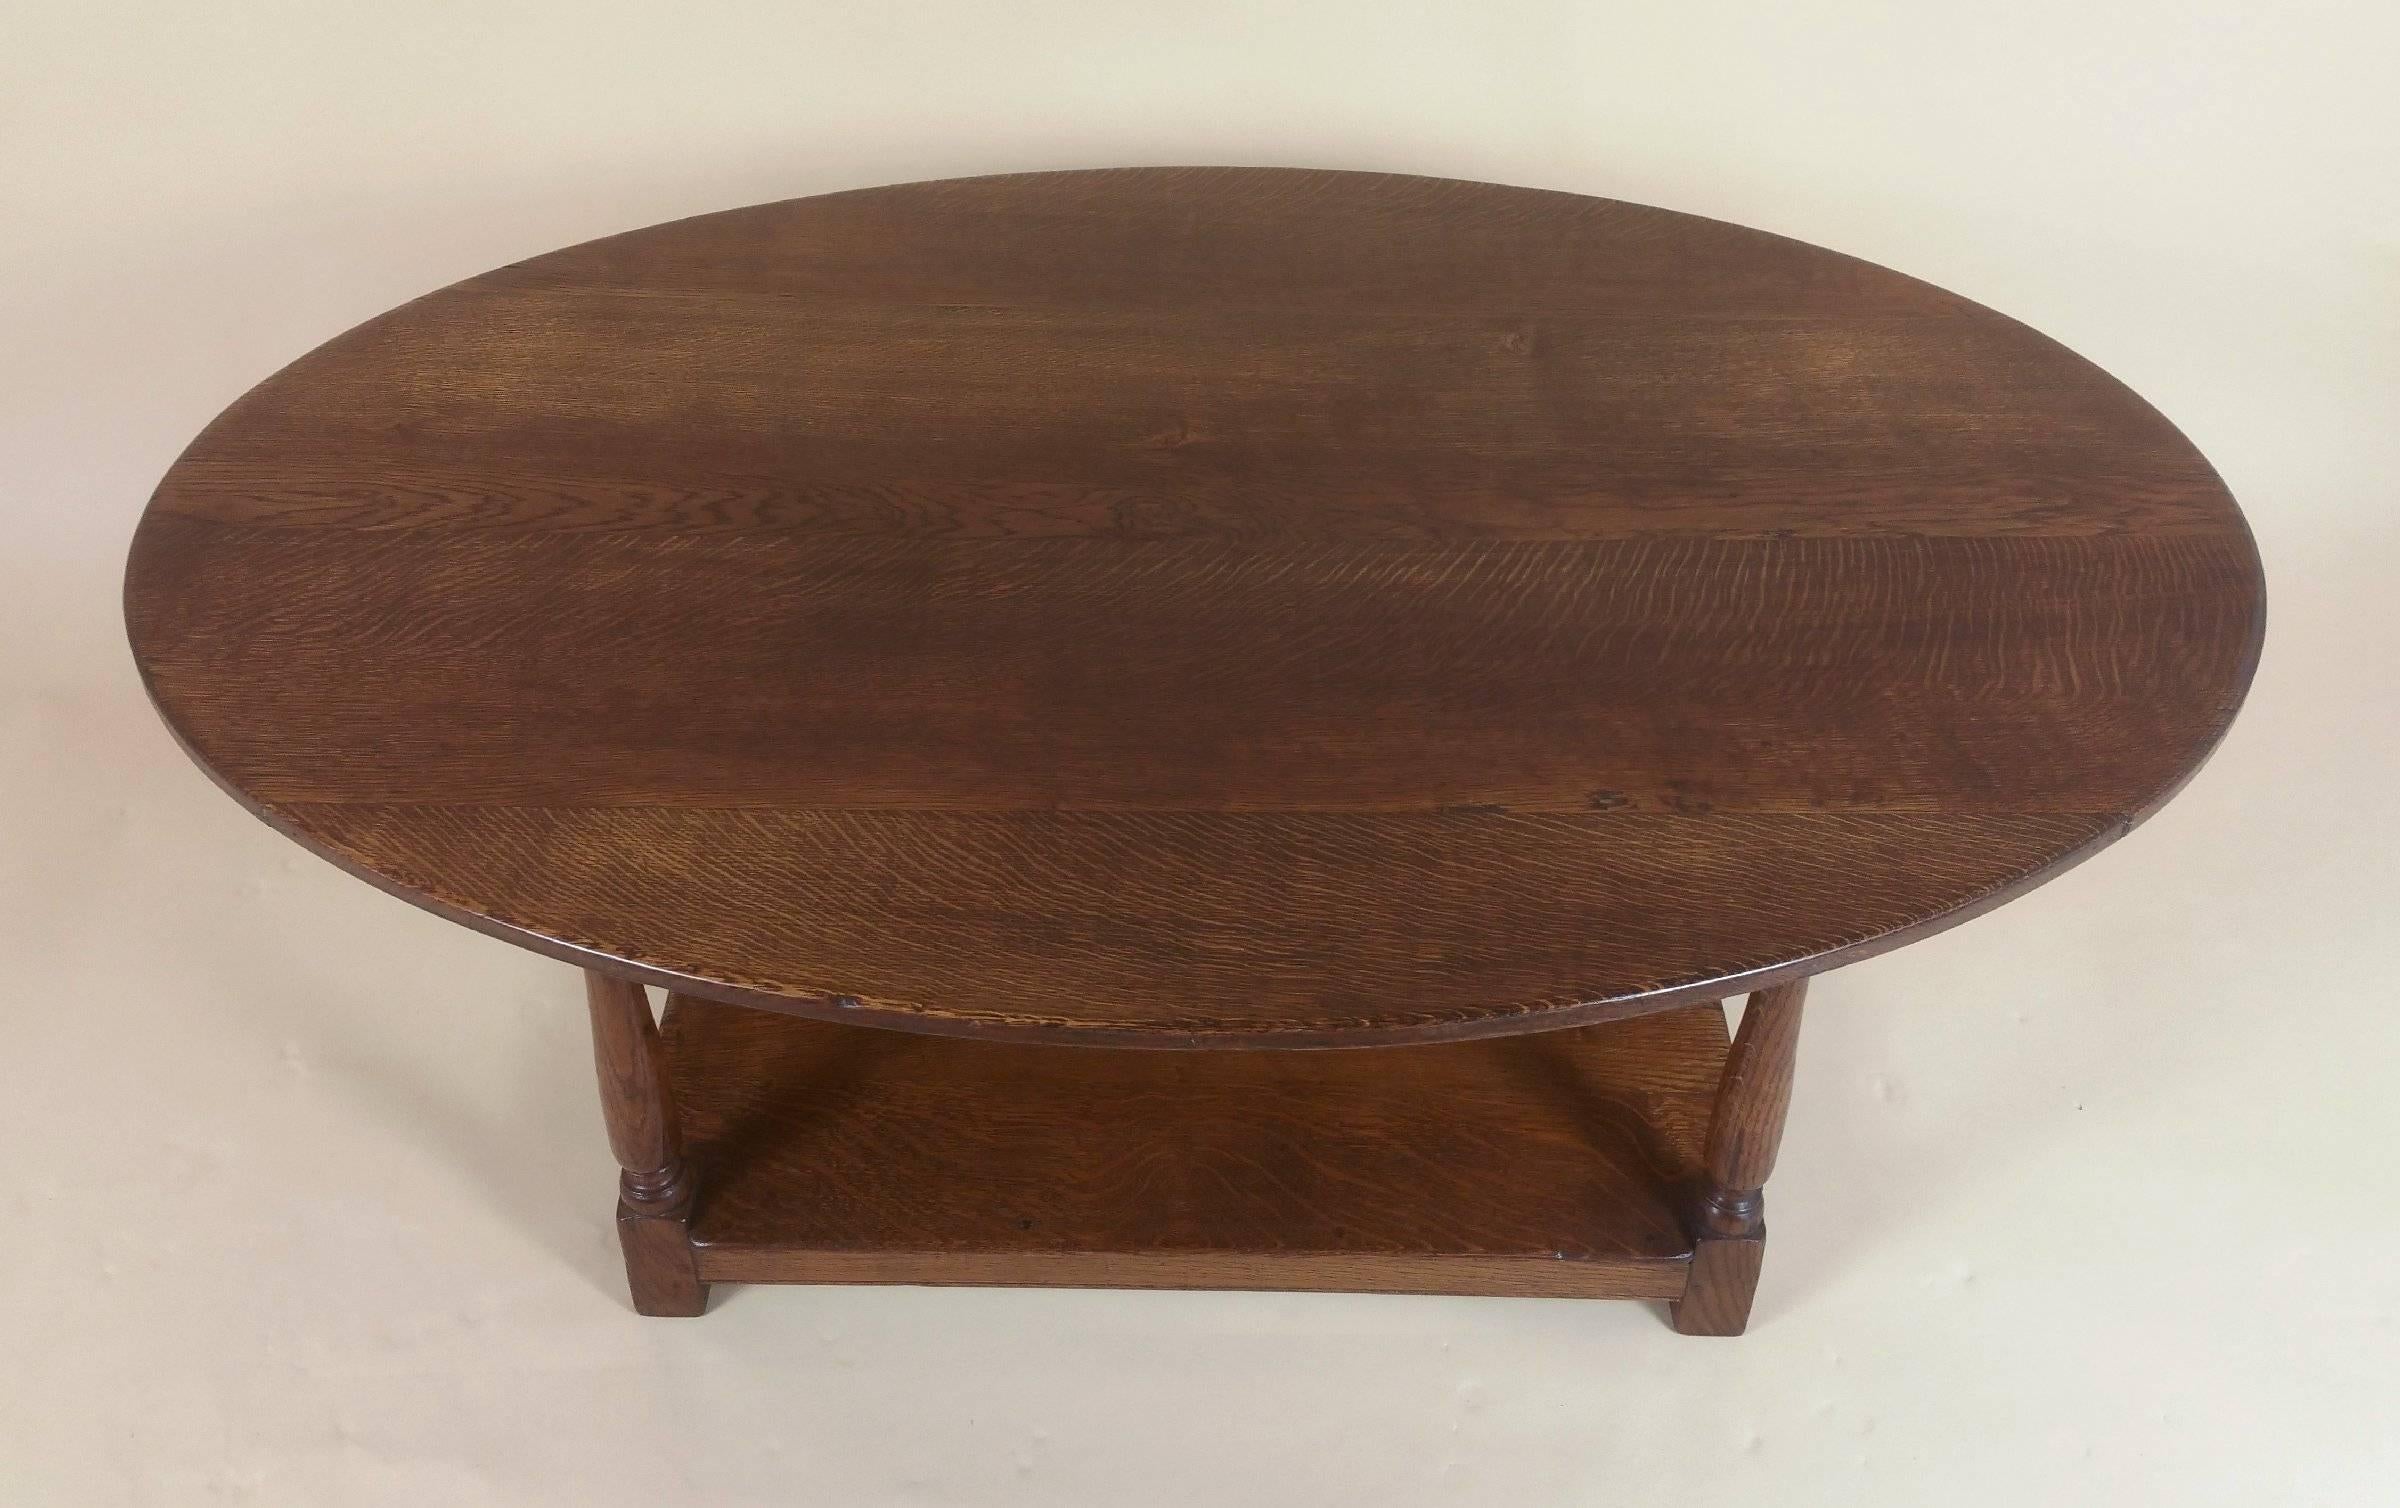 This handsome Edwardian oak oval coffee table features a rectangular under tier on shaped, turned supports. The table has a beautiful and warm patina top and displays a particularly lovely grained pattern. The table measures 48 in – 122 cm wide by